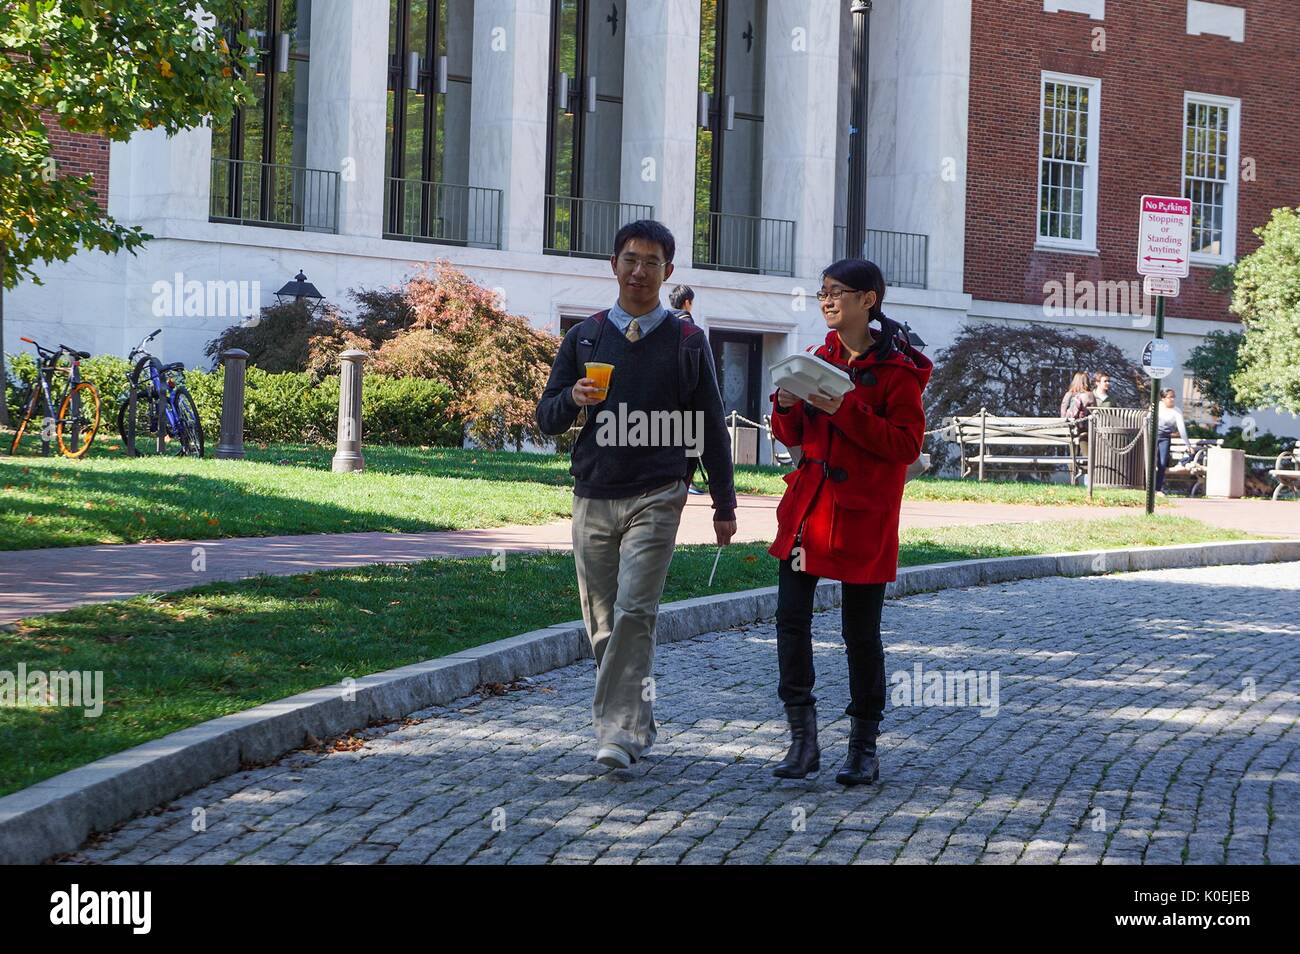 One male and one female college student holding drink and food take a stroll down the cobble stone driveway in front of the Milton S Eisenhower Library at Johns Hopkins University, smiling on a sunny day; bicycles and other students can be seen behind them on the grass in front of the library's entrance; Baltimore, Maryland, March, 2014. Courtesy Eric Chen. Stock Photo